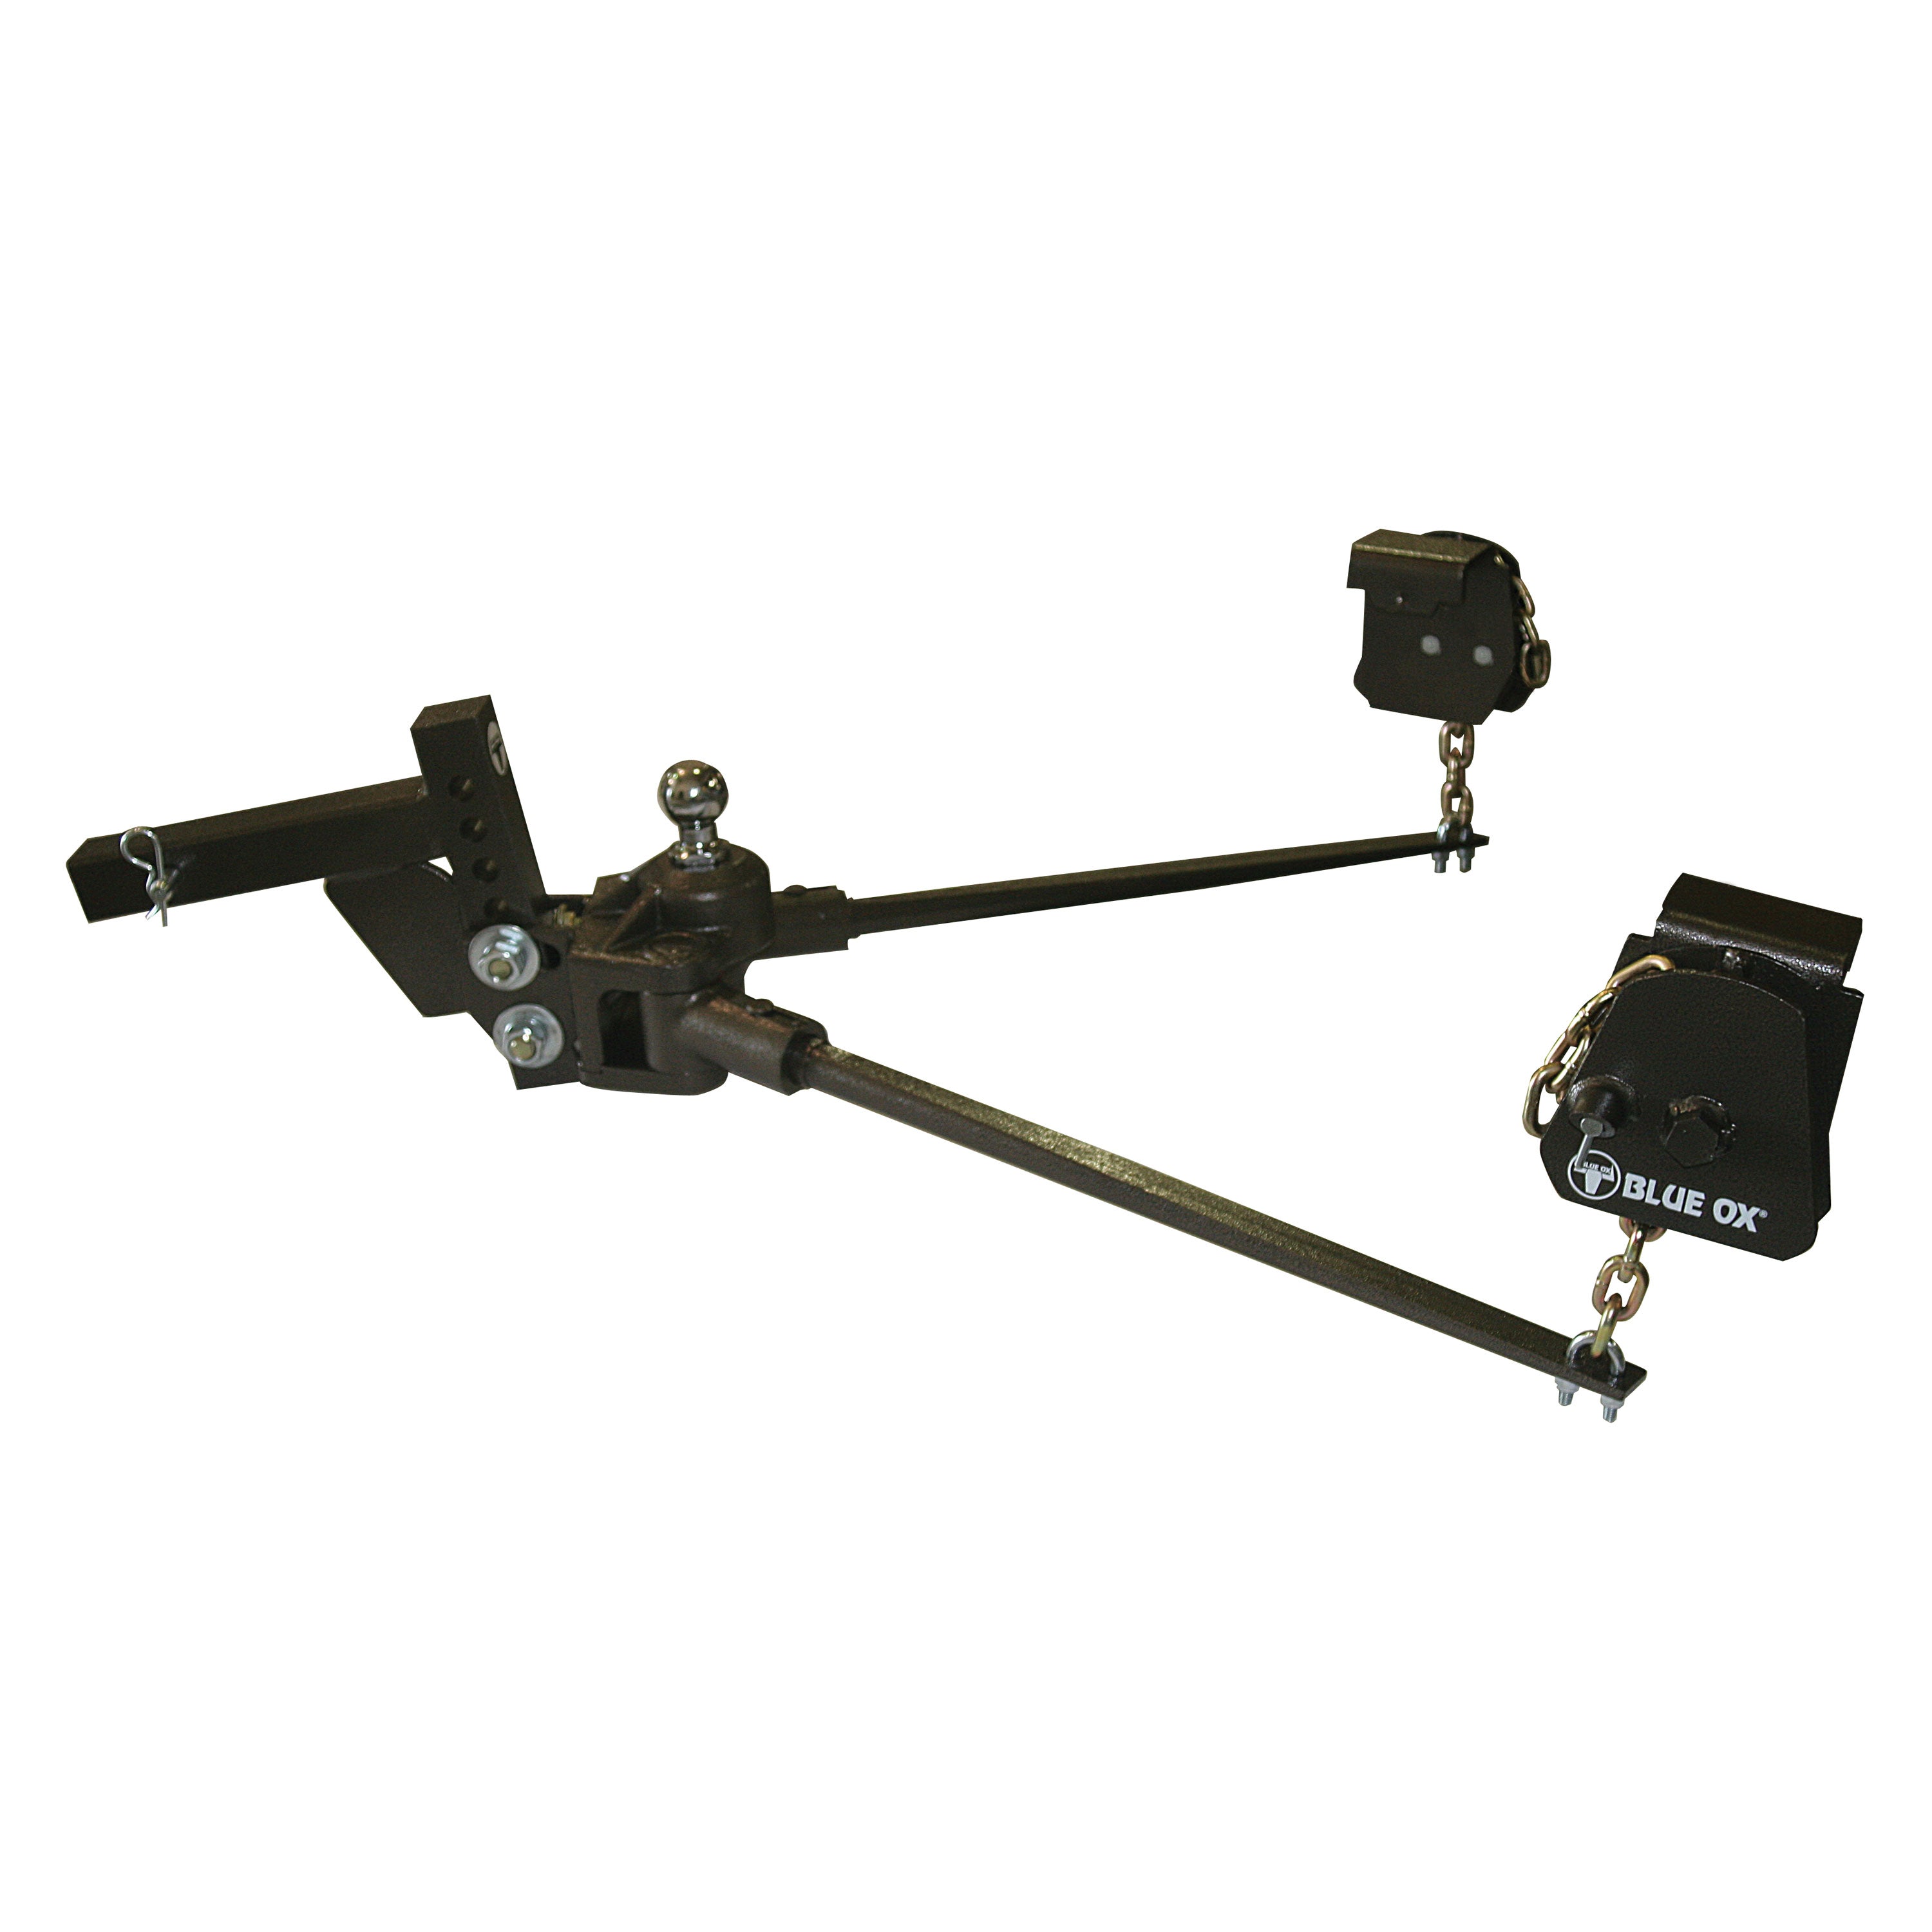 Blue Ox BXW1000 SwayPro Weight Distribution Hitch - 10,000 GTW/1,000 TW